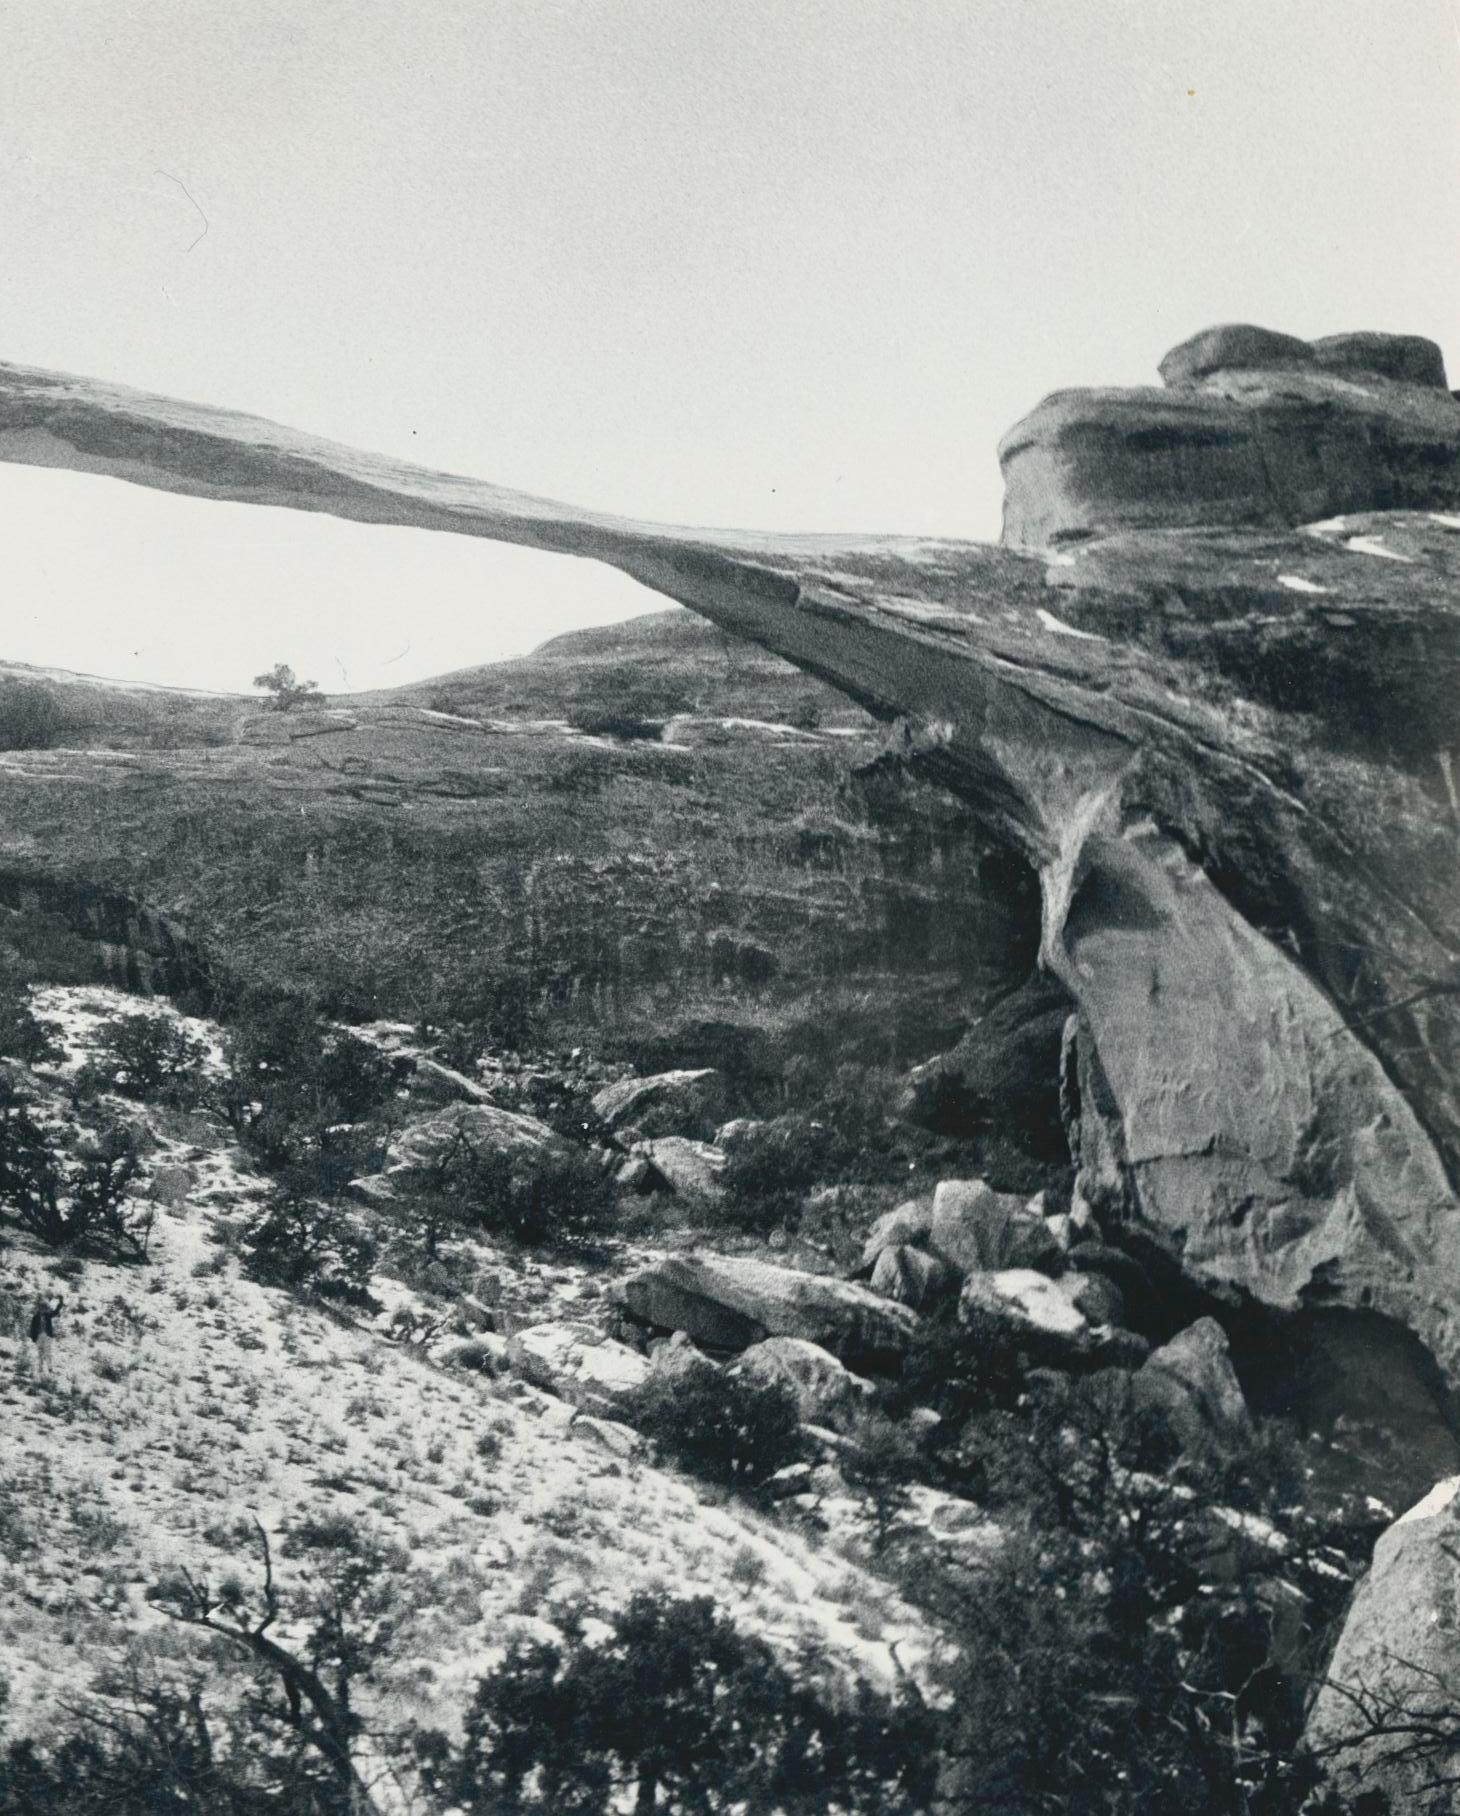 Arches Nationalpark, Black and White, USA 1960s, 17, 1 x 23, 5 cm - Photograph by Erich Andres